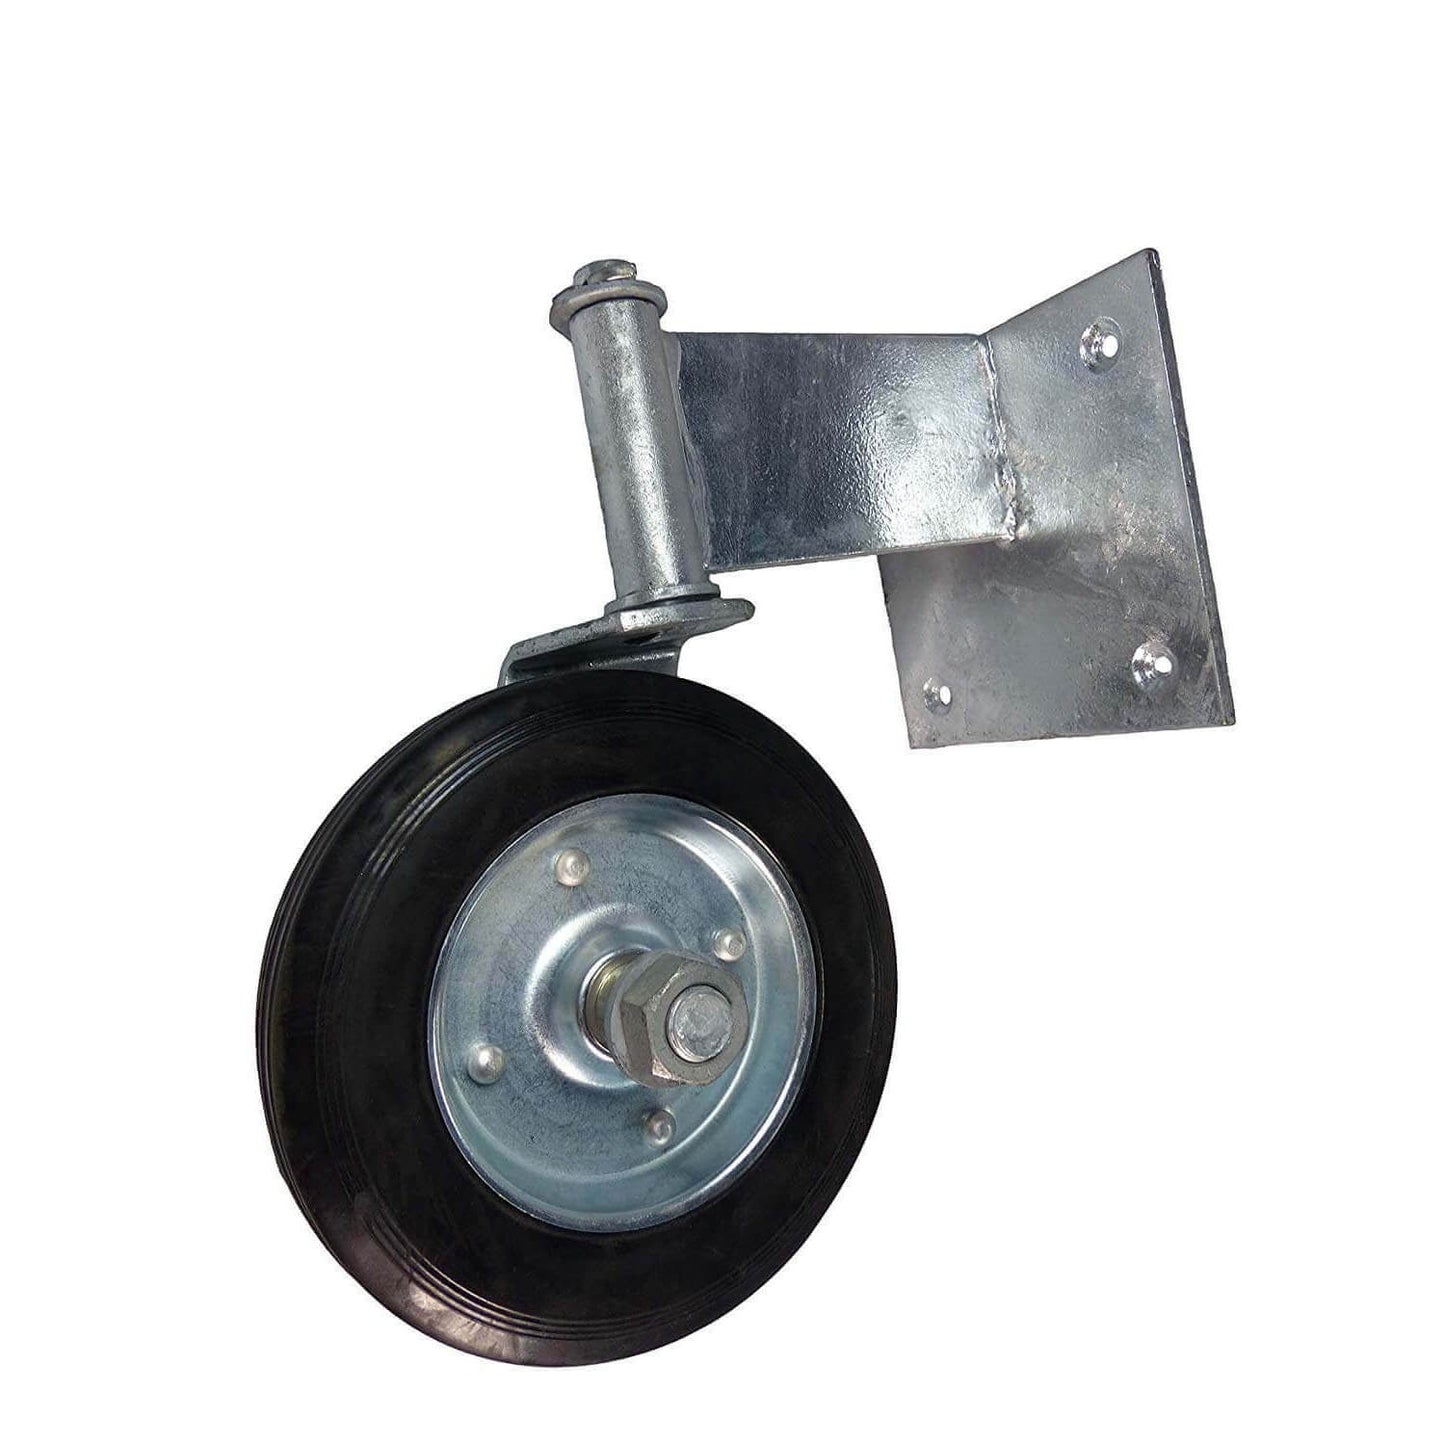 Swivel Wheel for Swinging Wood Gate. Galvanized Steel guards against rusting. Product is easy to install